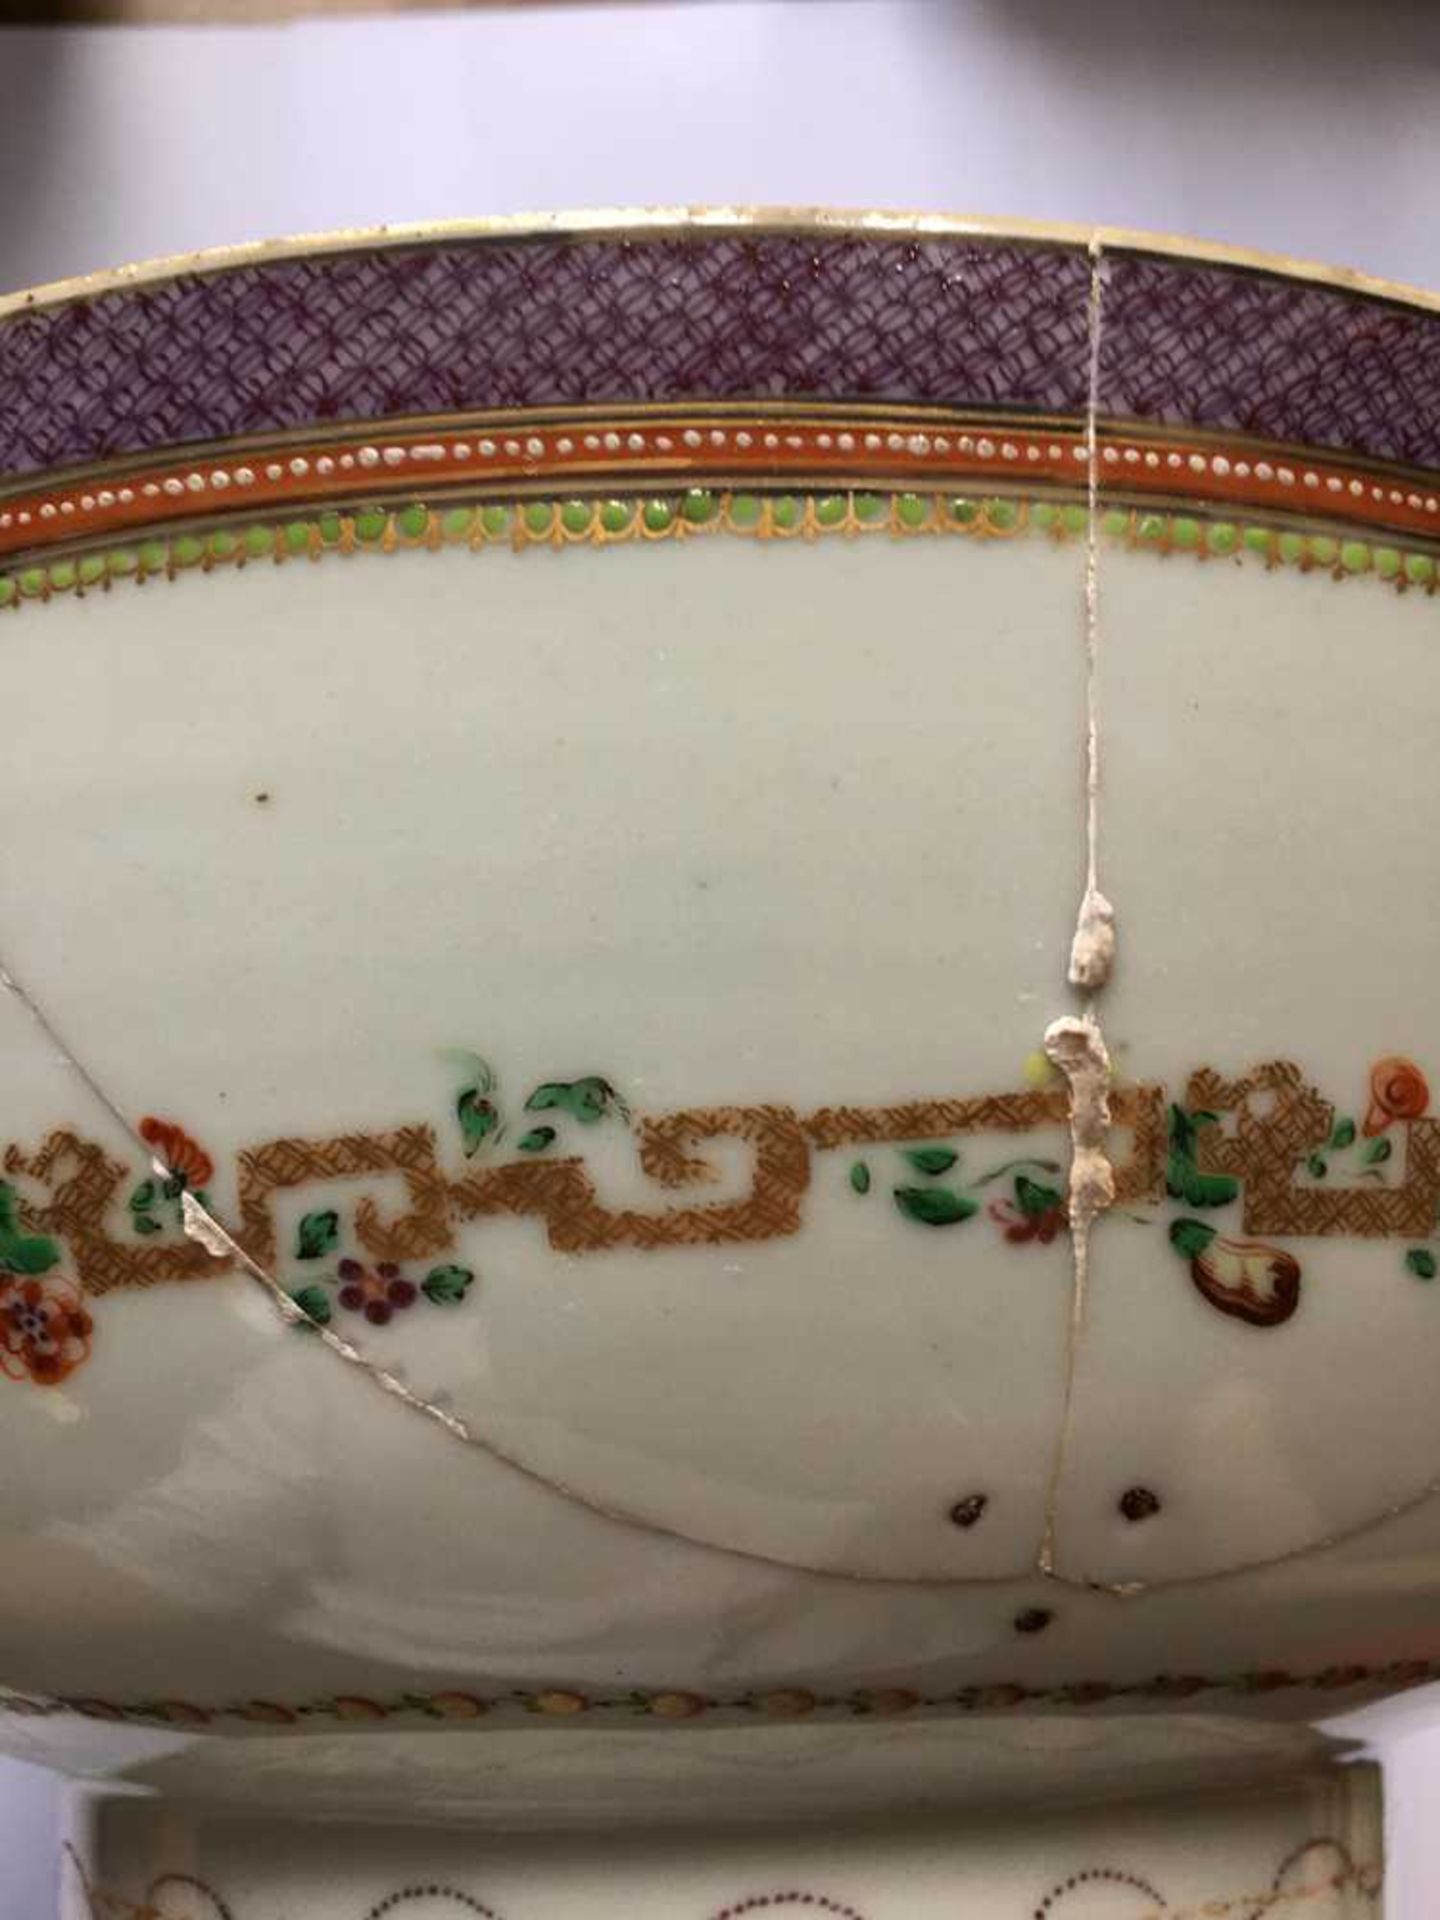 TWO CHINESE EXPORT PORCELAIN PUNCH BOWLS QING DYNASTY, LATE 18TH/19TH CENTURY - Image 13 of 33